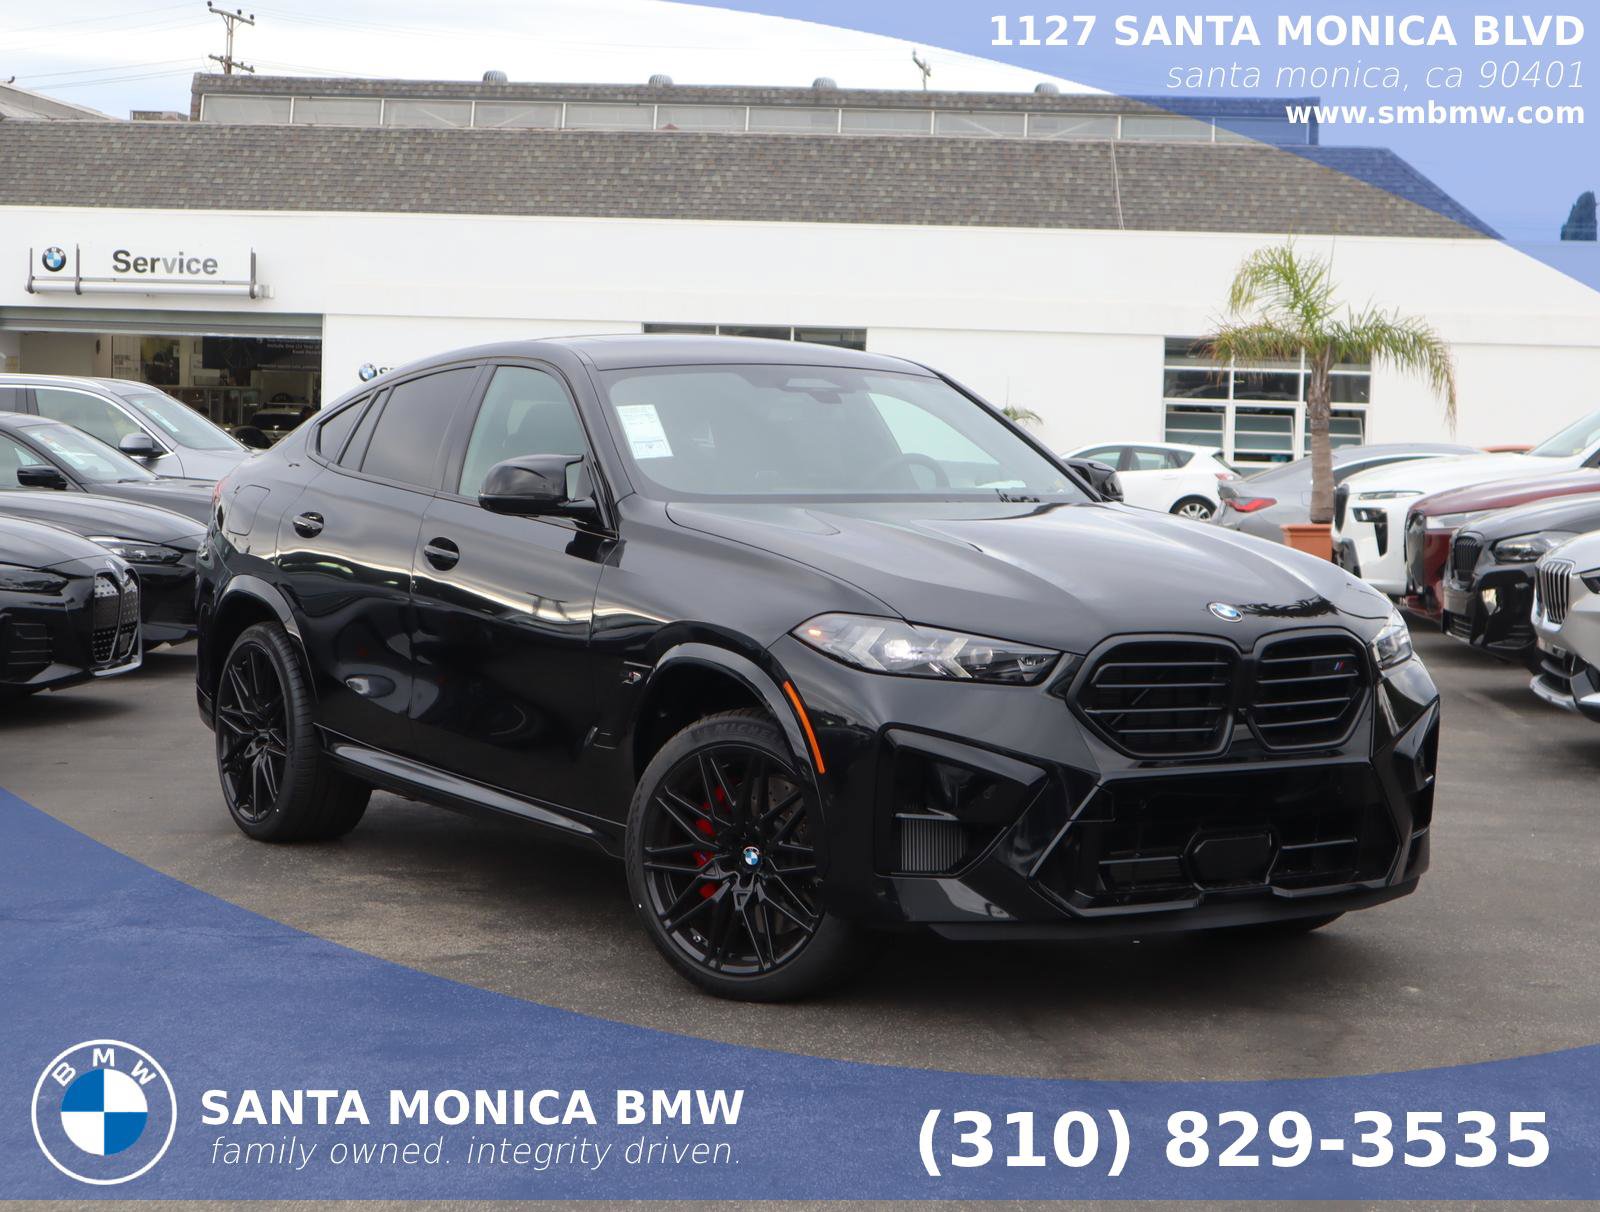 New BMW X6 for Sale in Placentia, CA